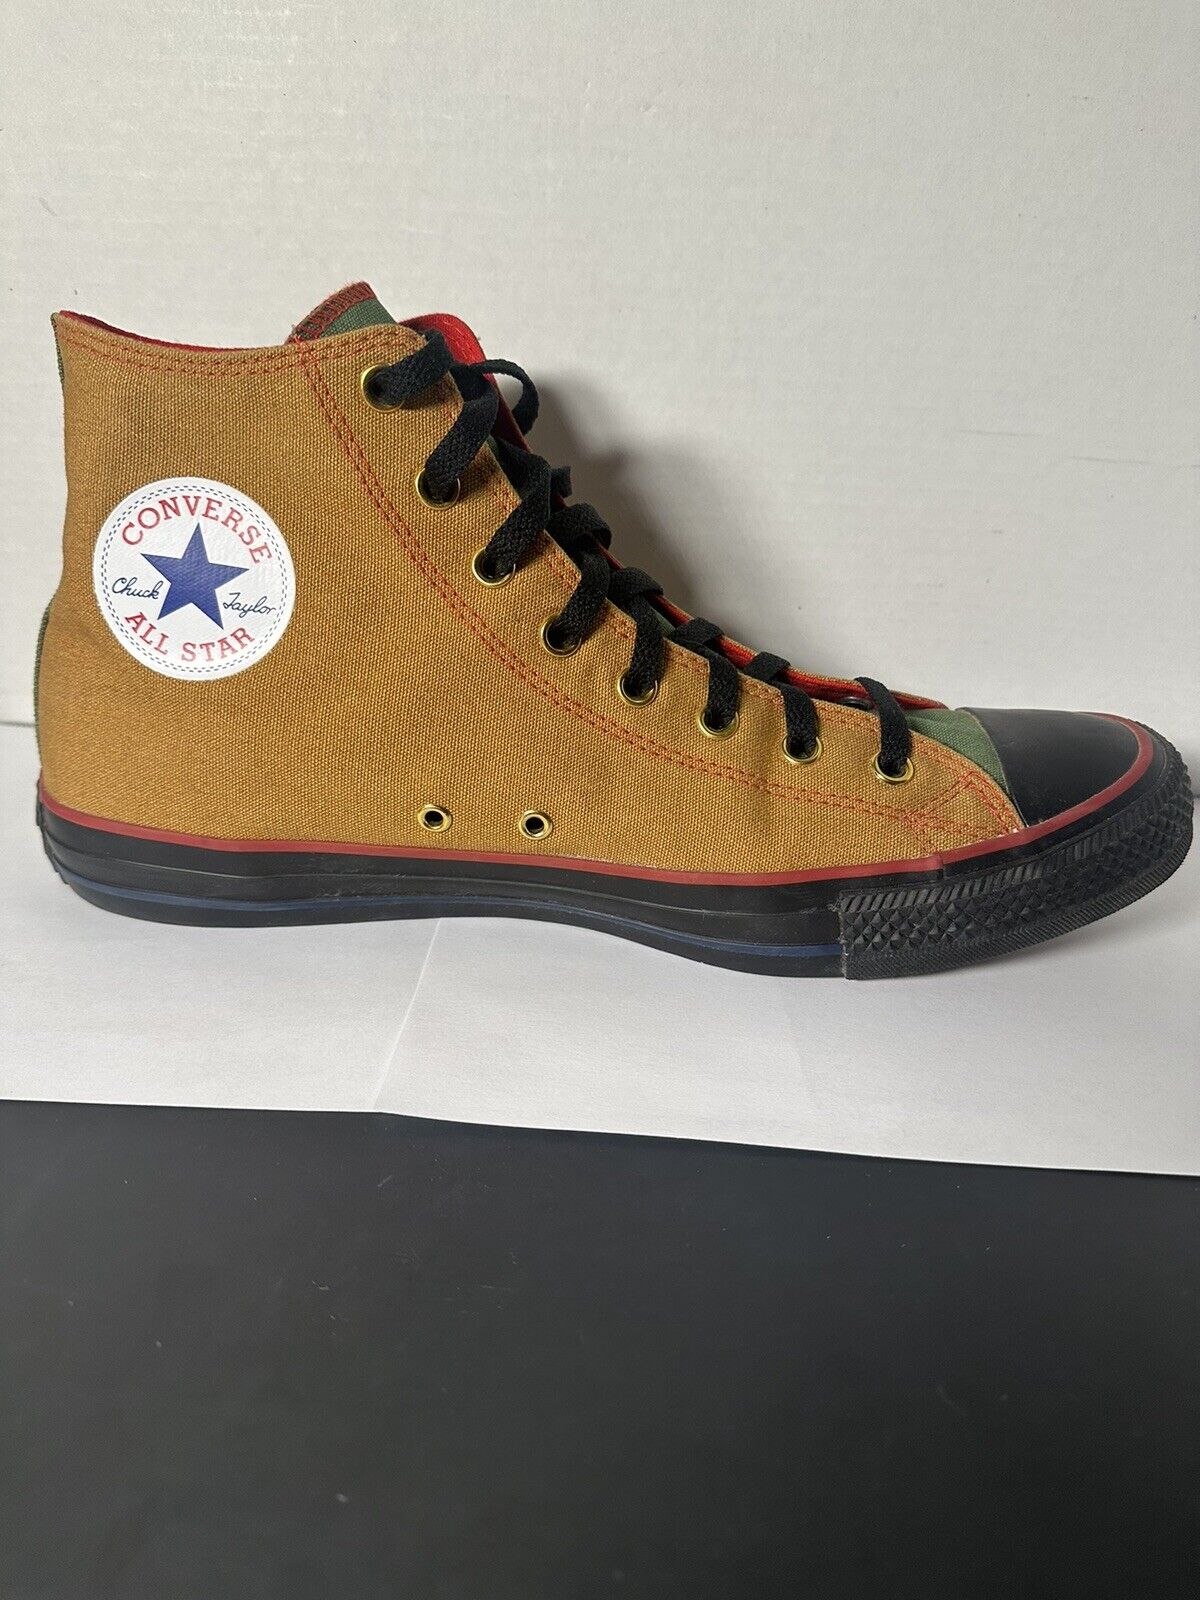 Converse Chuck Taylor All Star High Tan Green Red Size 13